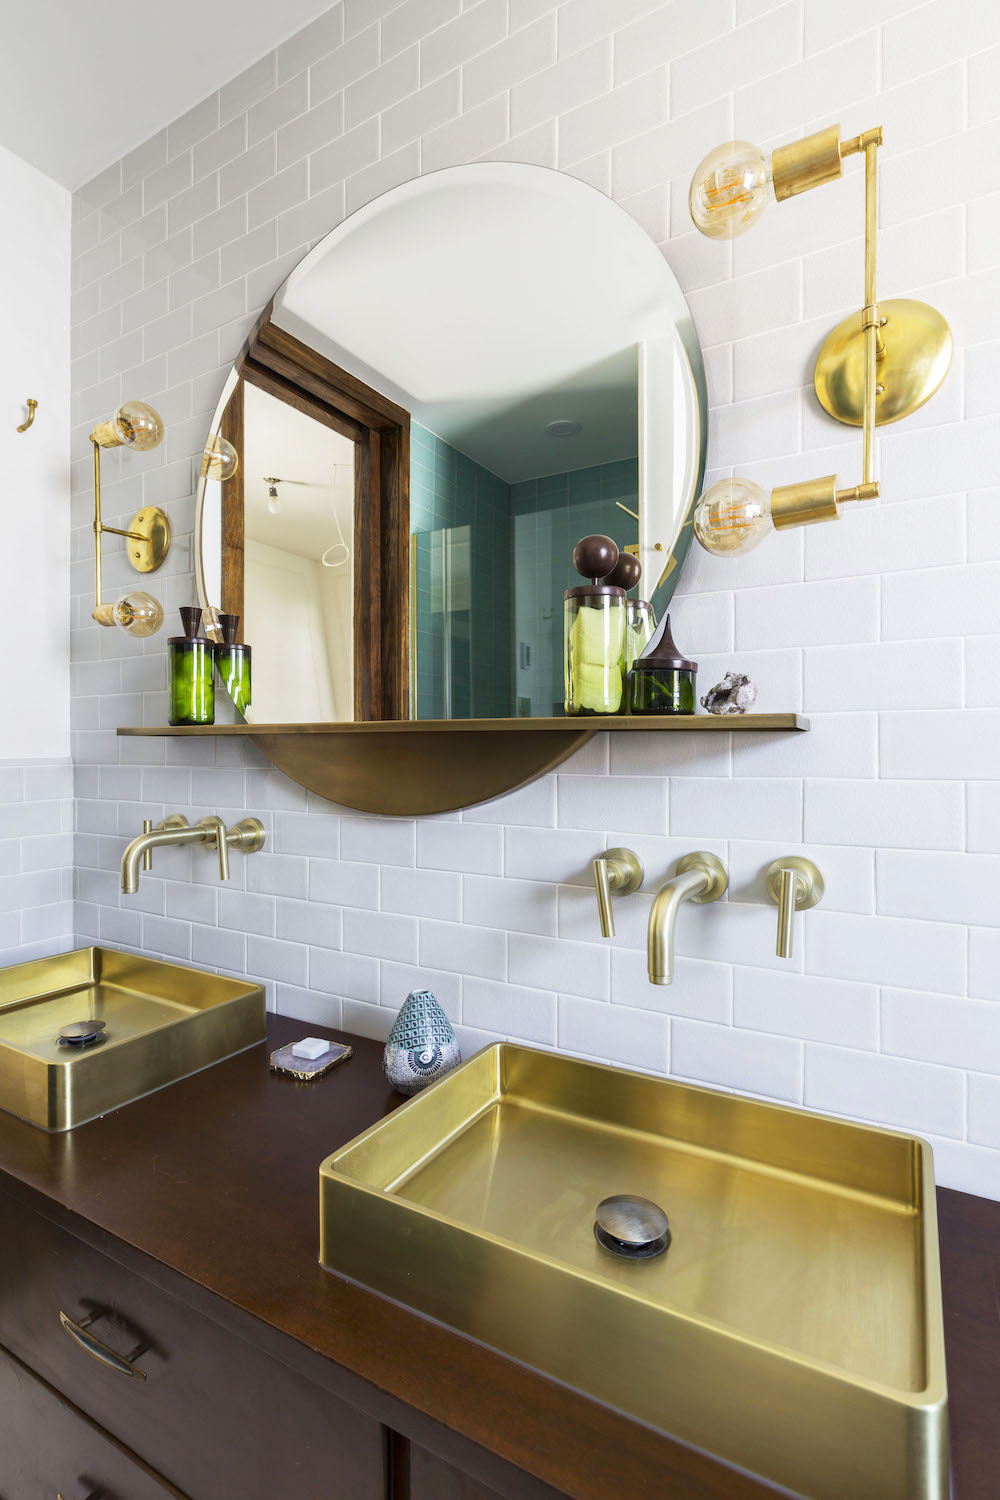 sinks faucets and decor with gold accents bathroom